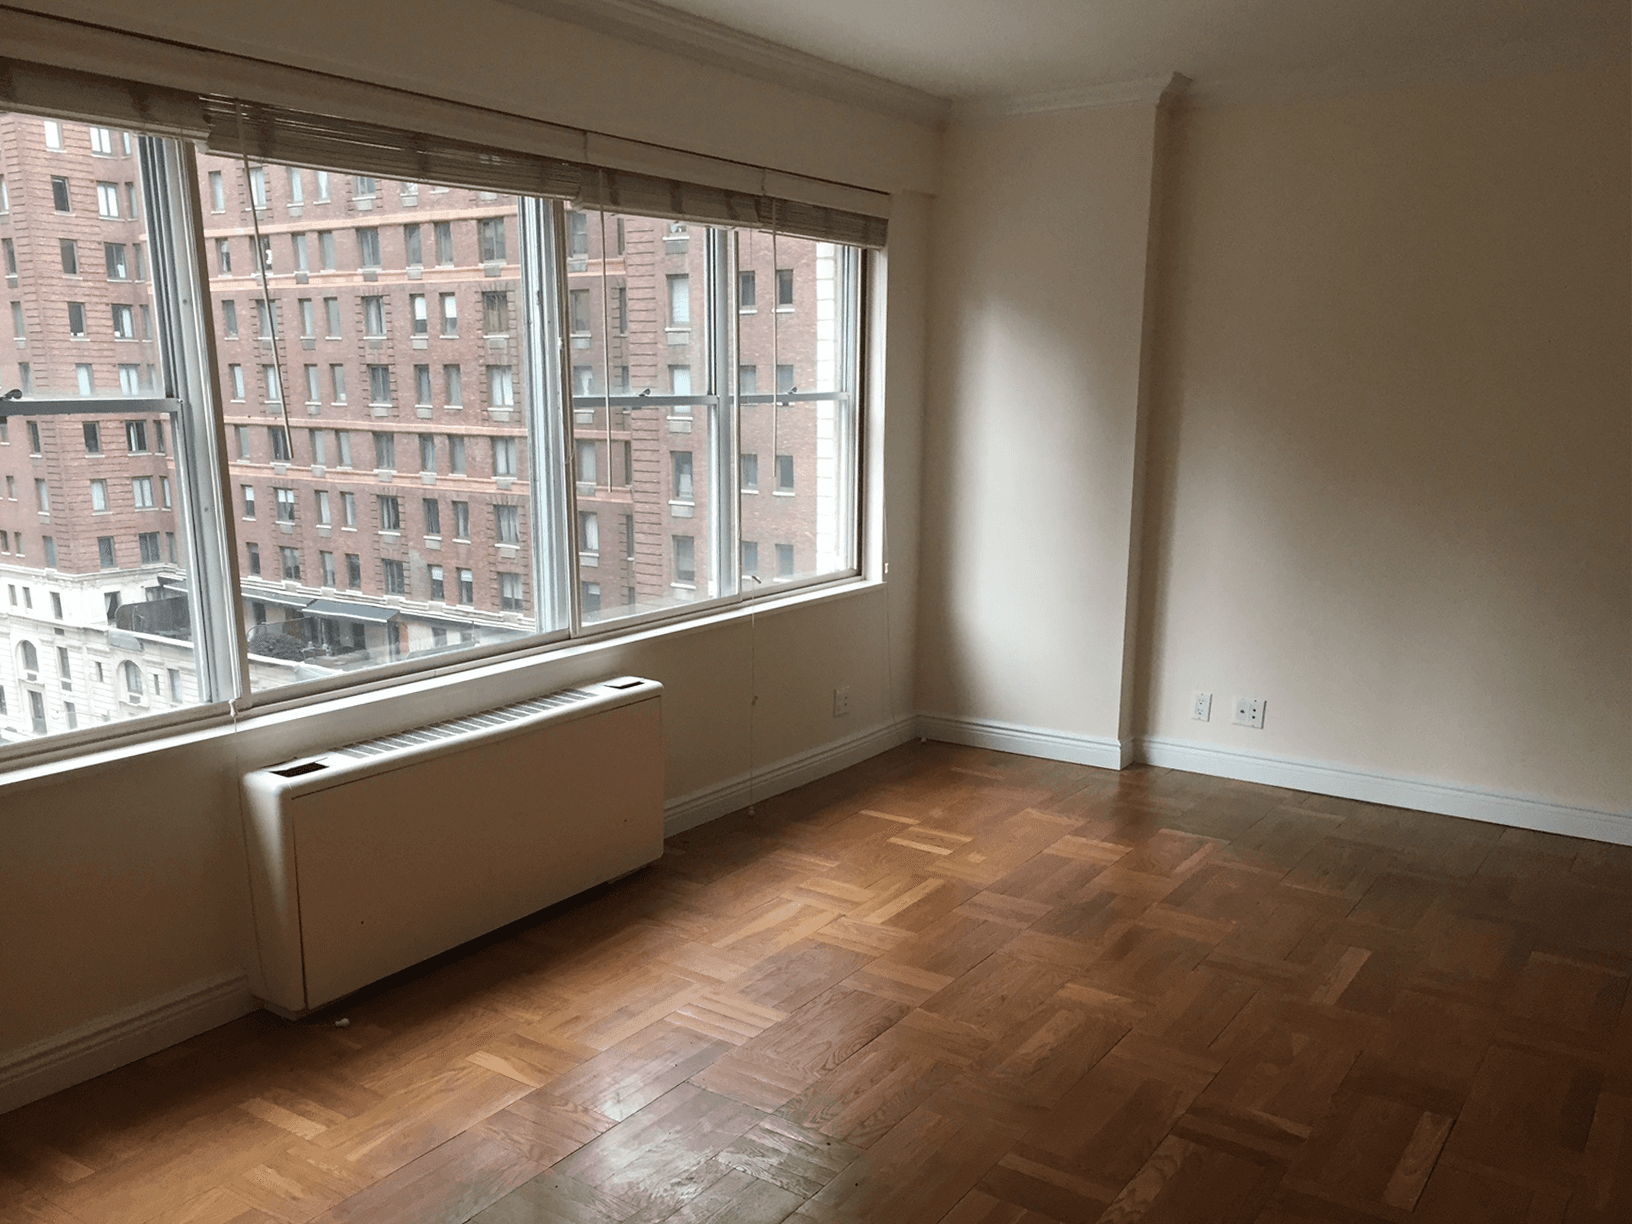 Luxury Full Service Building..600 Sq Ft Studio Steps to Central Park..West 57th Street..Steps from Subway..No Fee